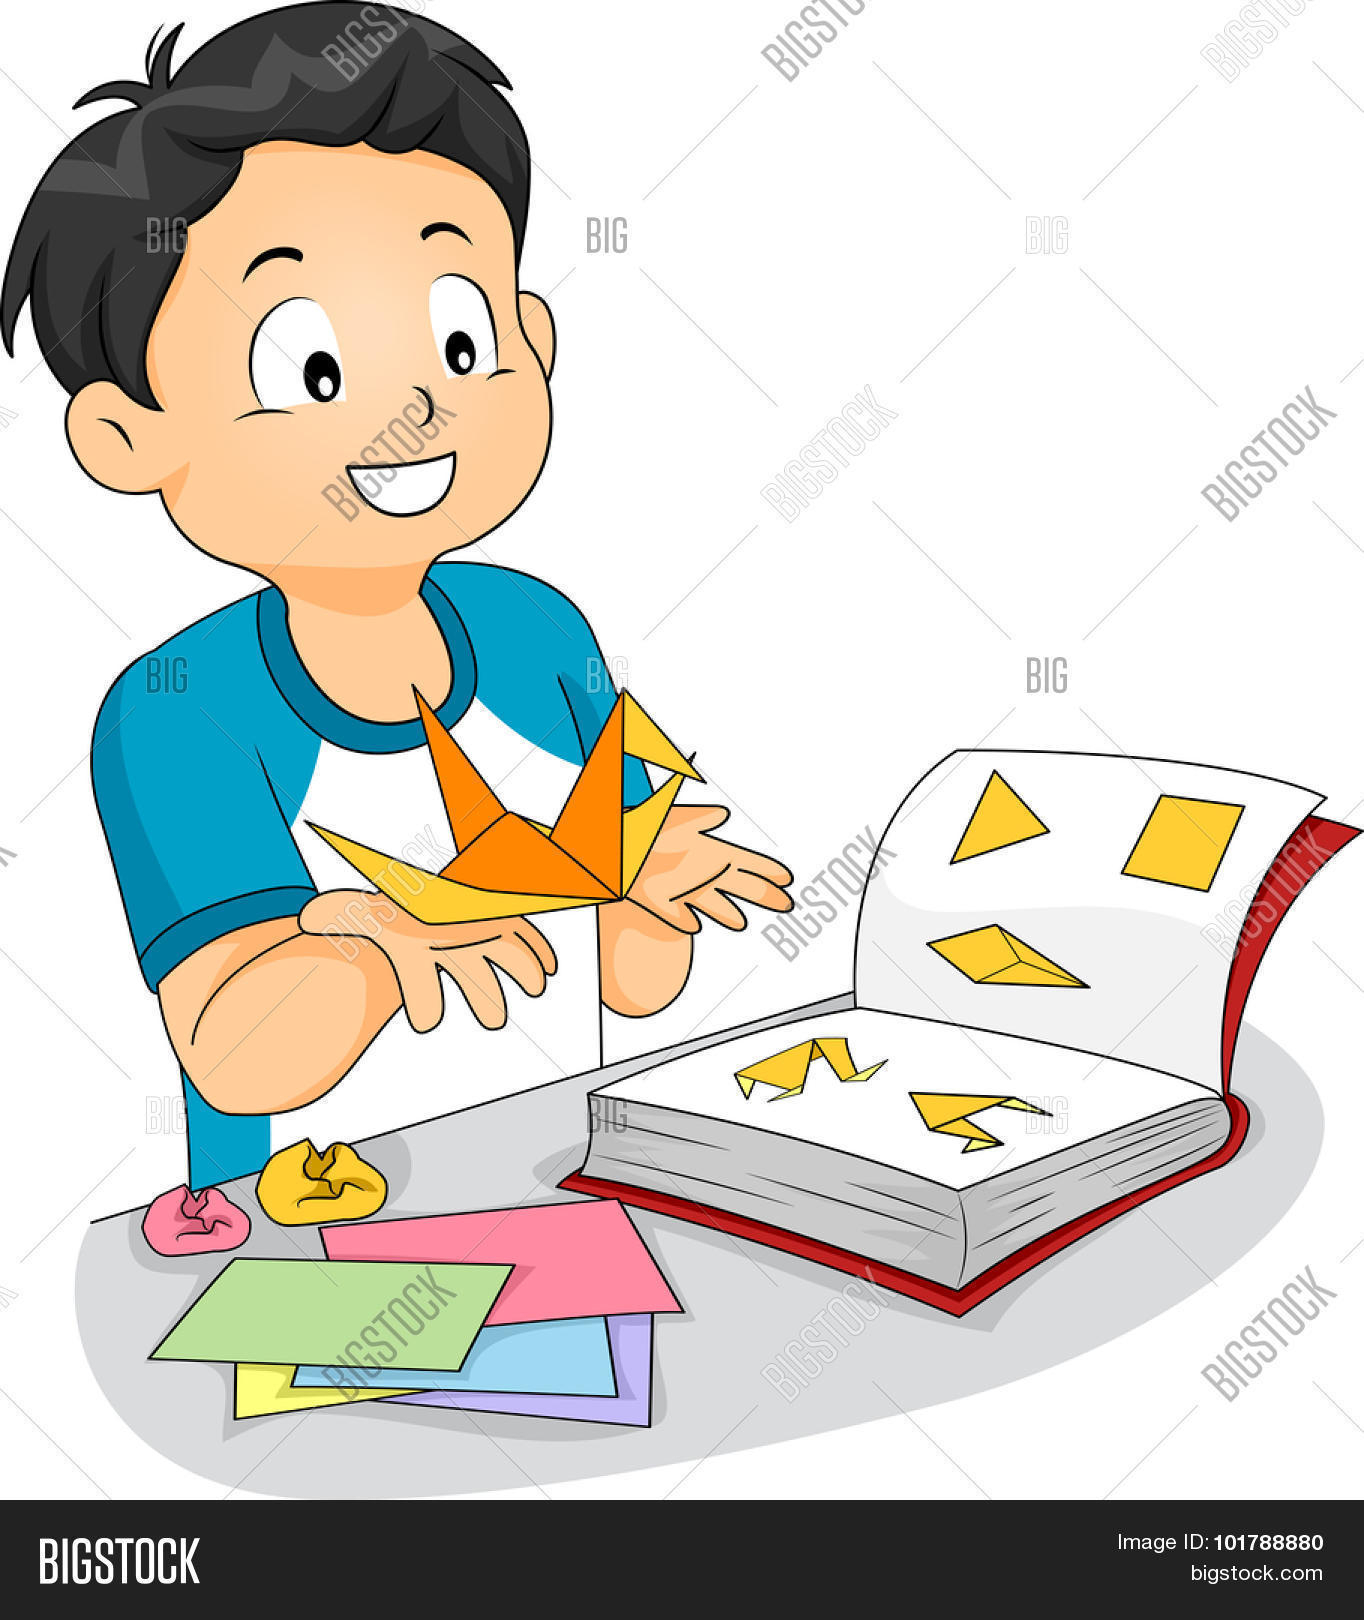 Make An Origami Book Illustration Of A Little Boy Following An Origami Book To Make A